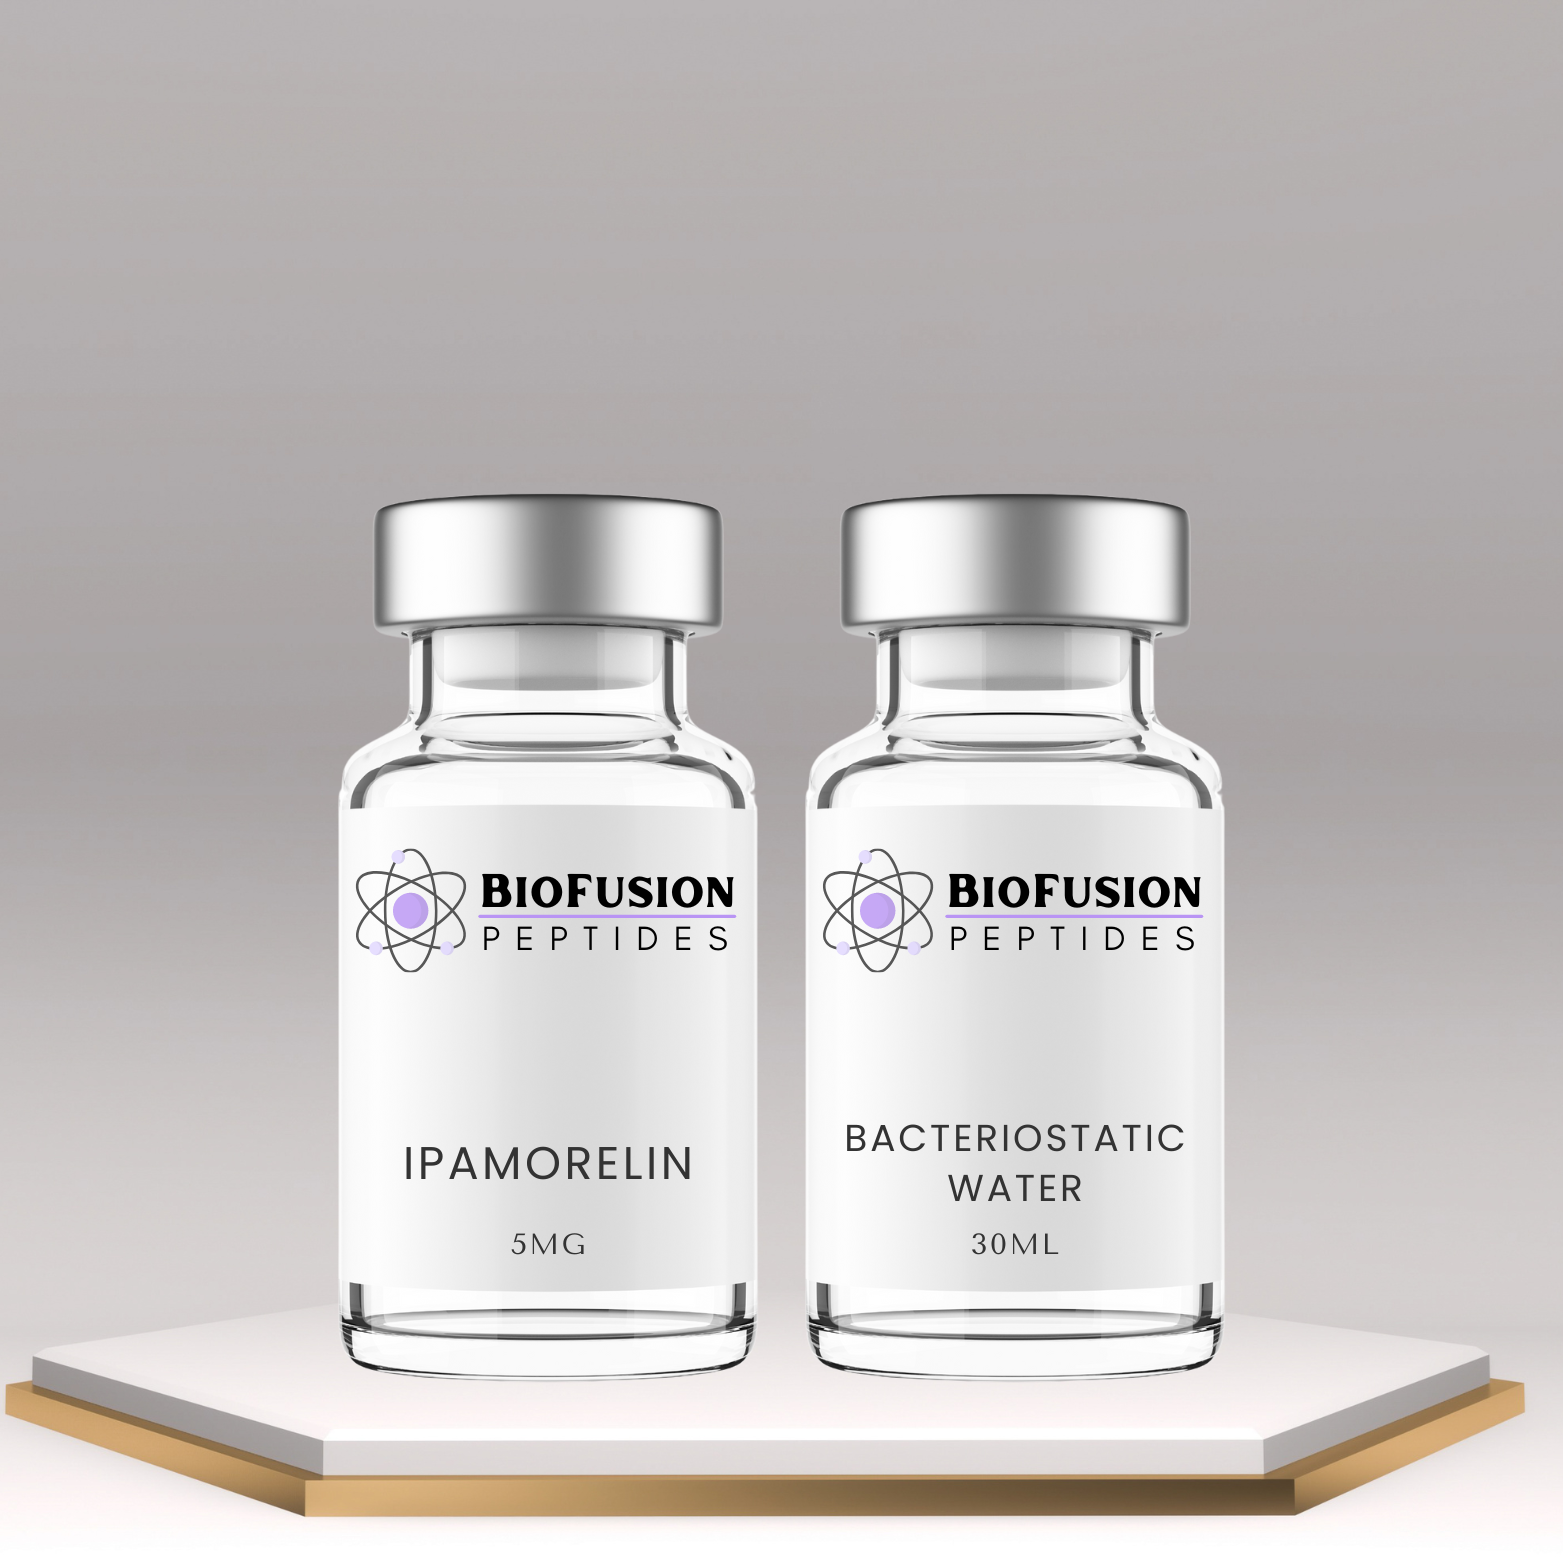 BioFusion Peptides Ipamorelin kit with bacteriostatic water